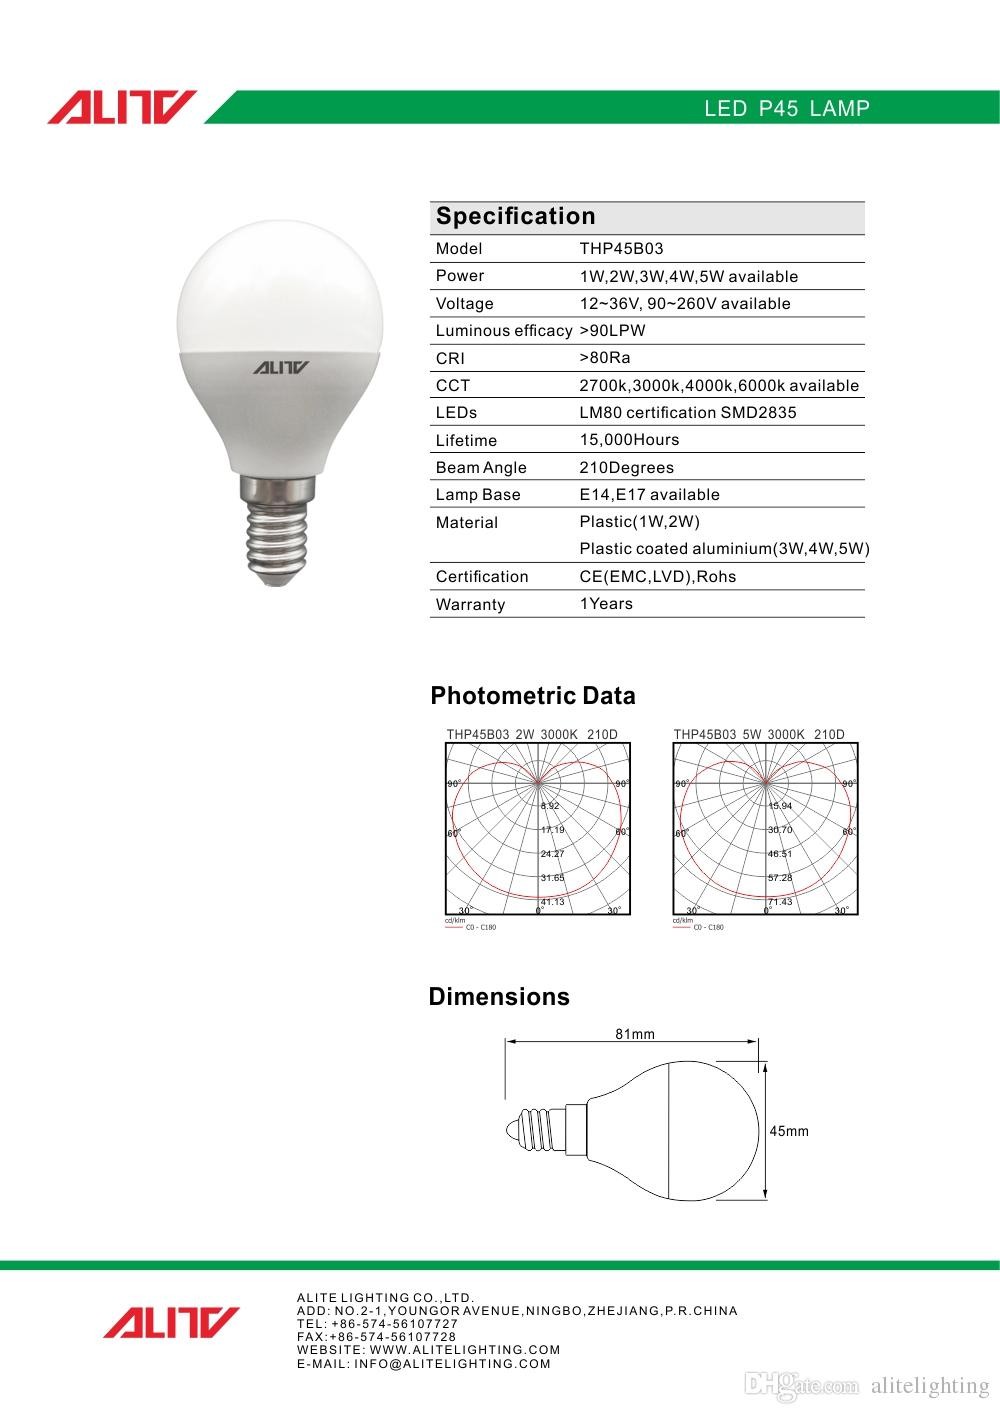 5w PRICE 6 0 USD PCS Included freight We like best led bulb